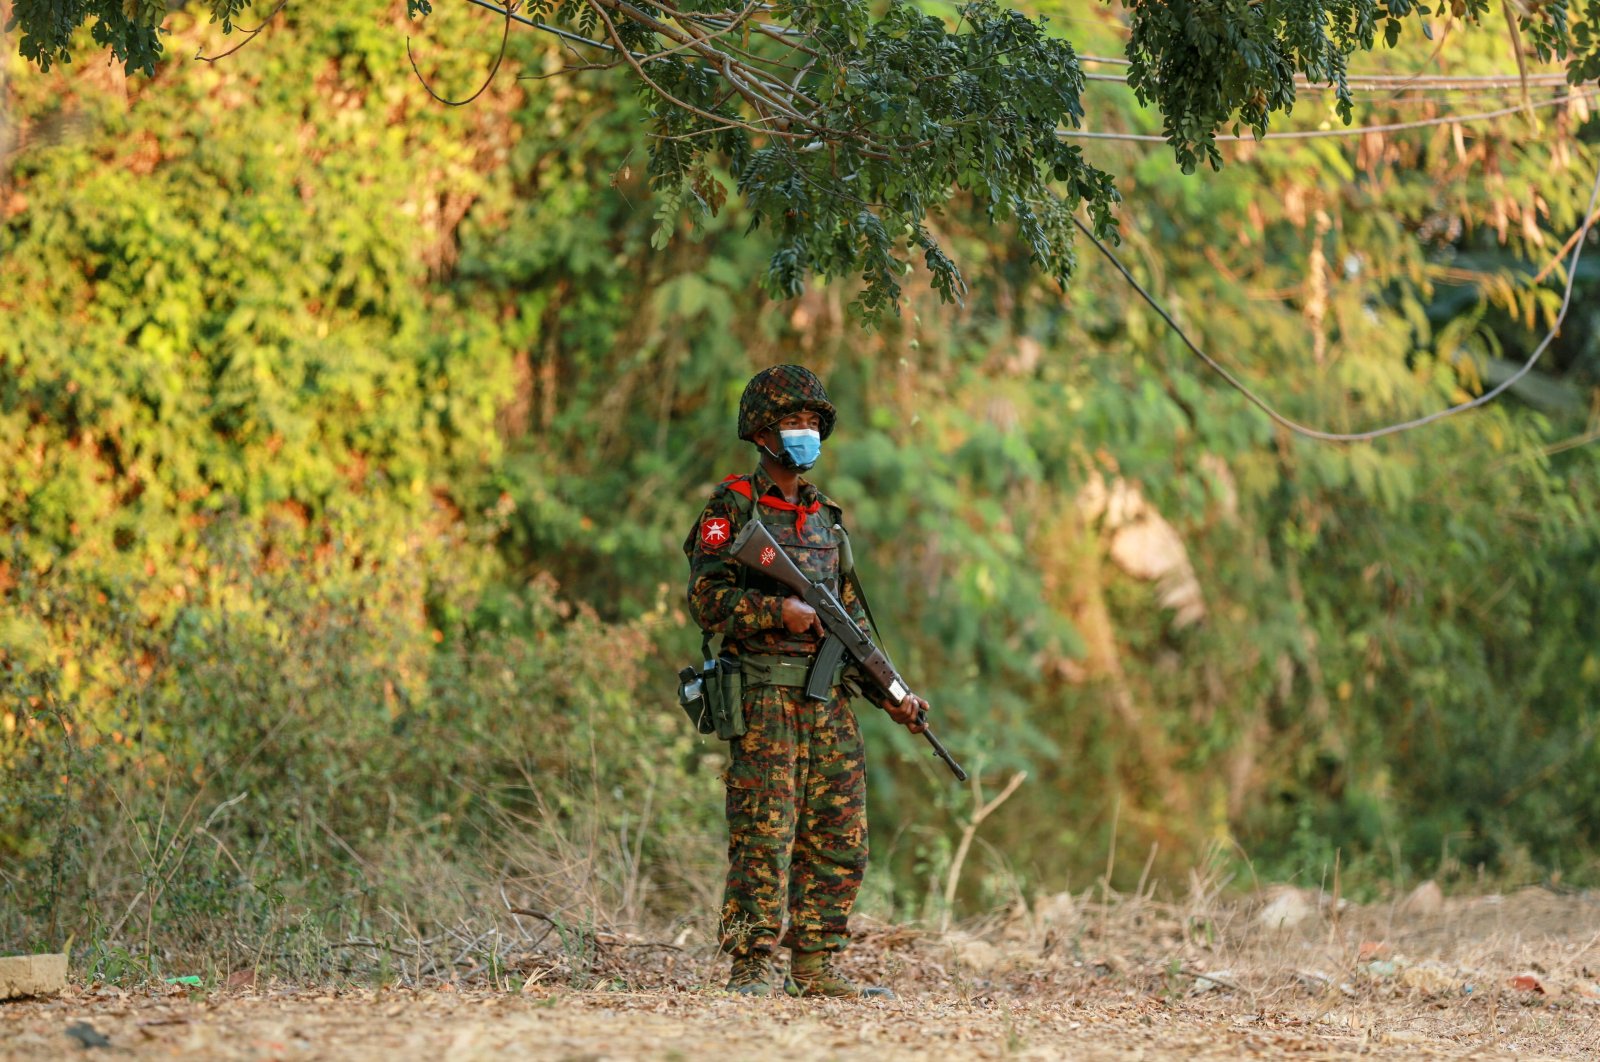 A soldier in Myanmar stands guard near the congress compound in Naypyitaw, Myanmar, Feb. 2, 2021. (Reuters Photo)